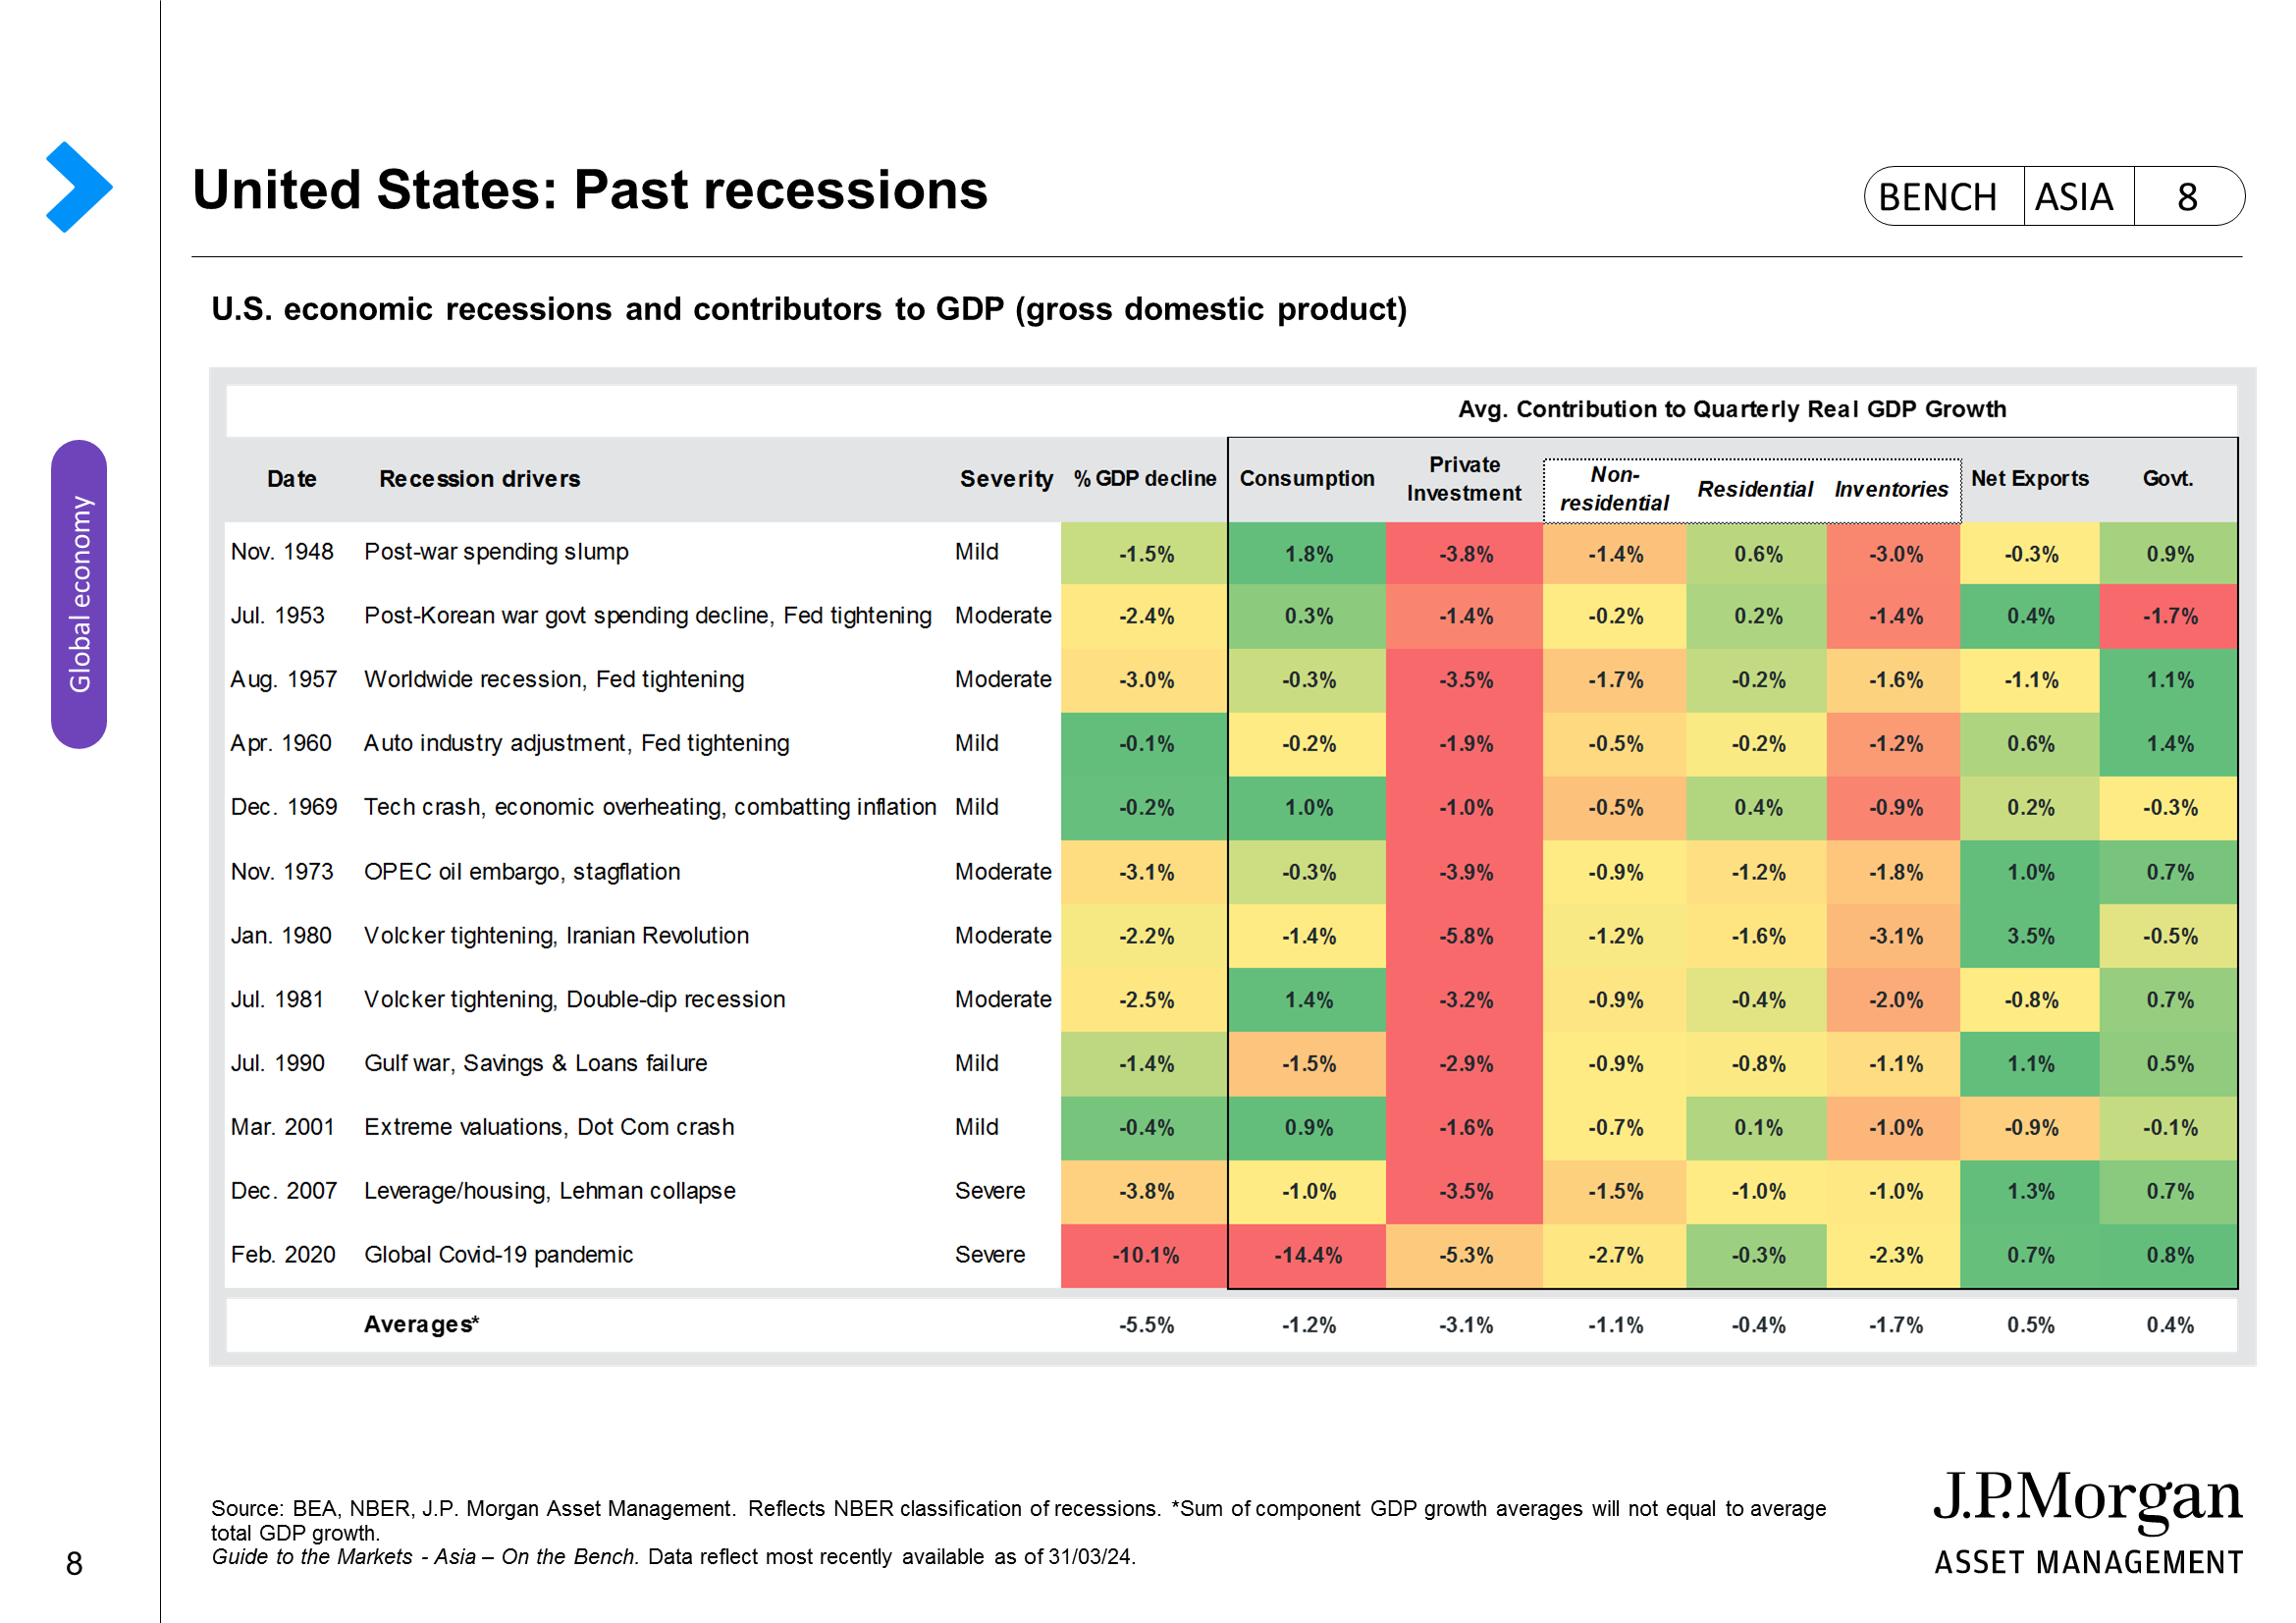 Performance across asset classes during times of geopolitical crisis